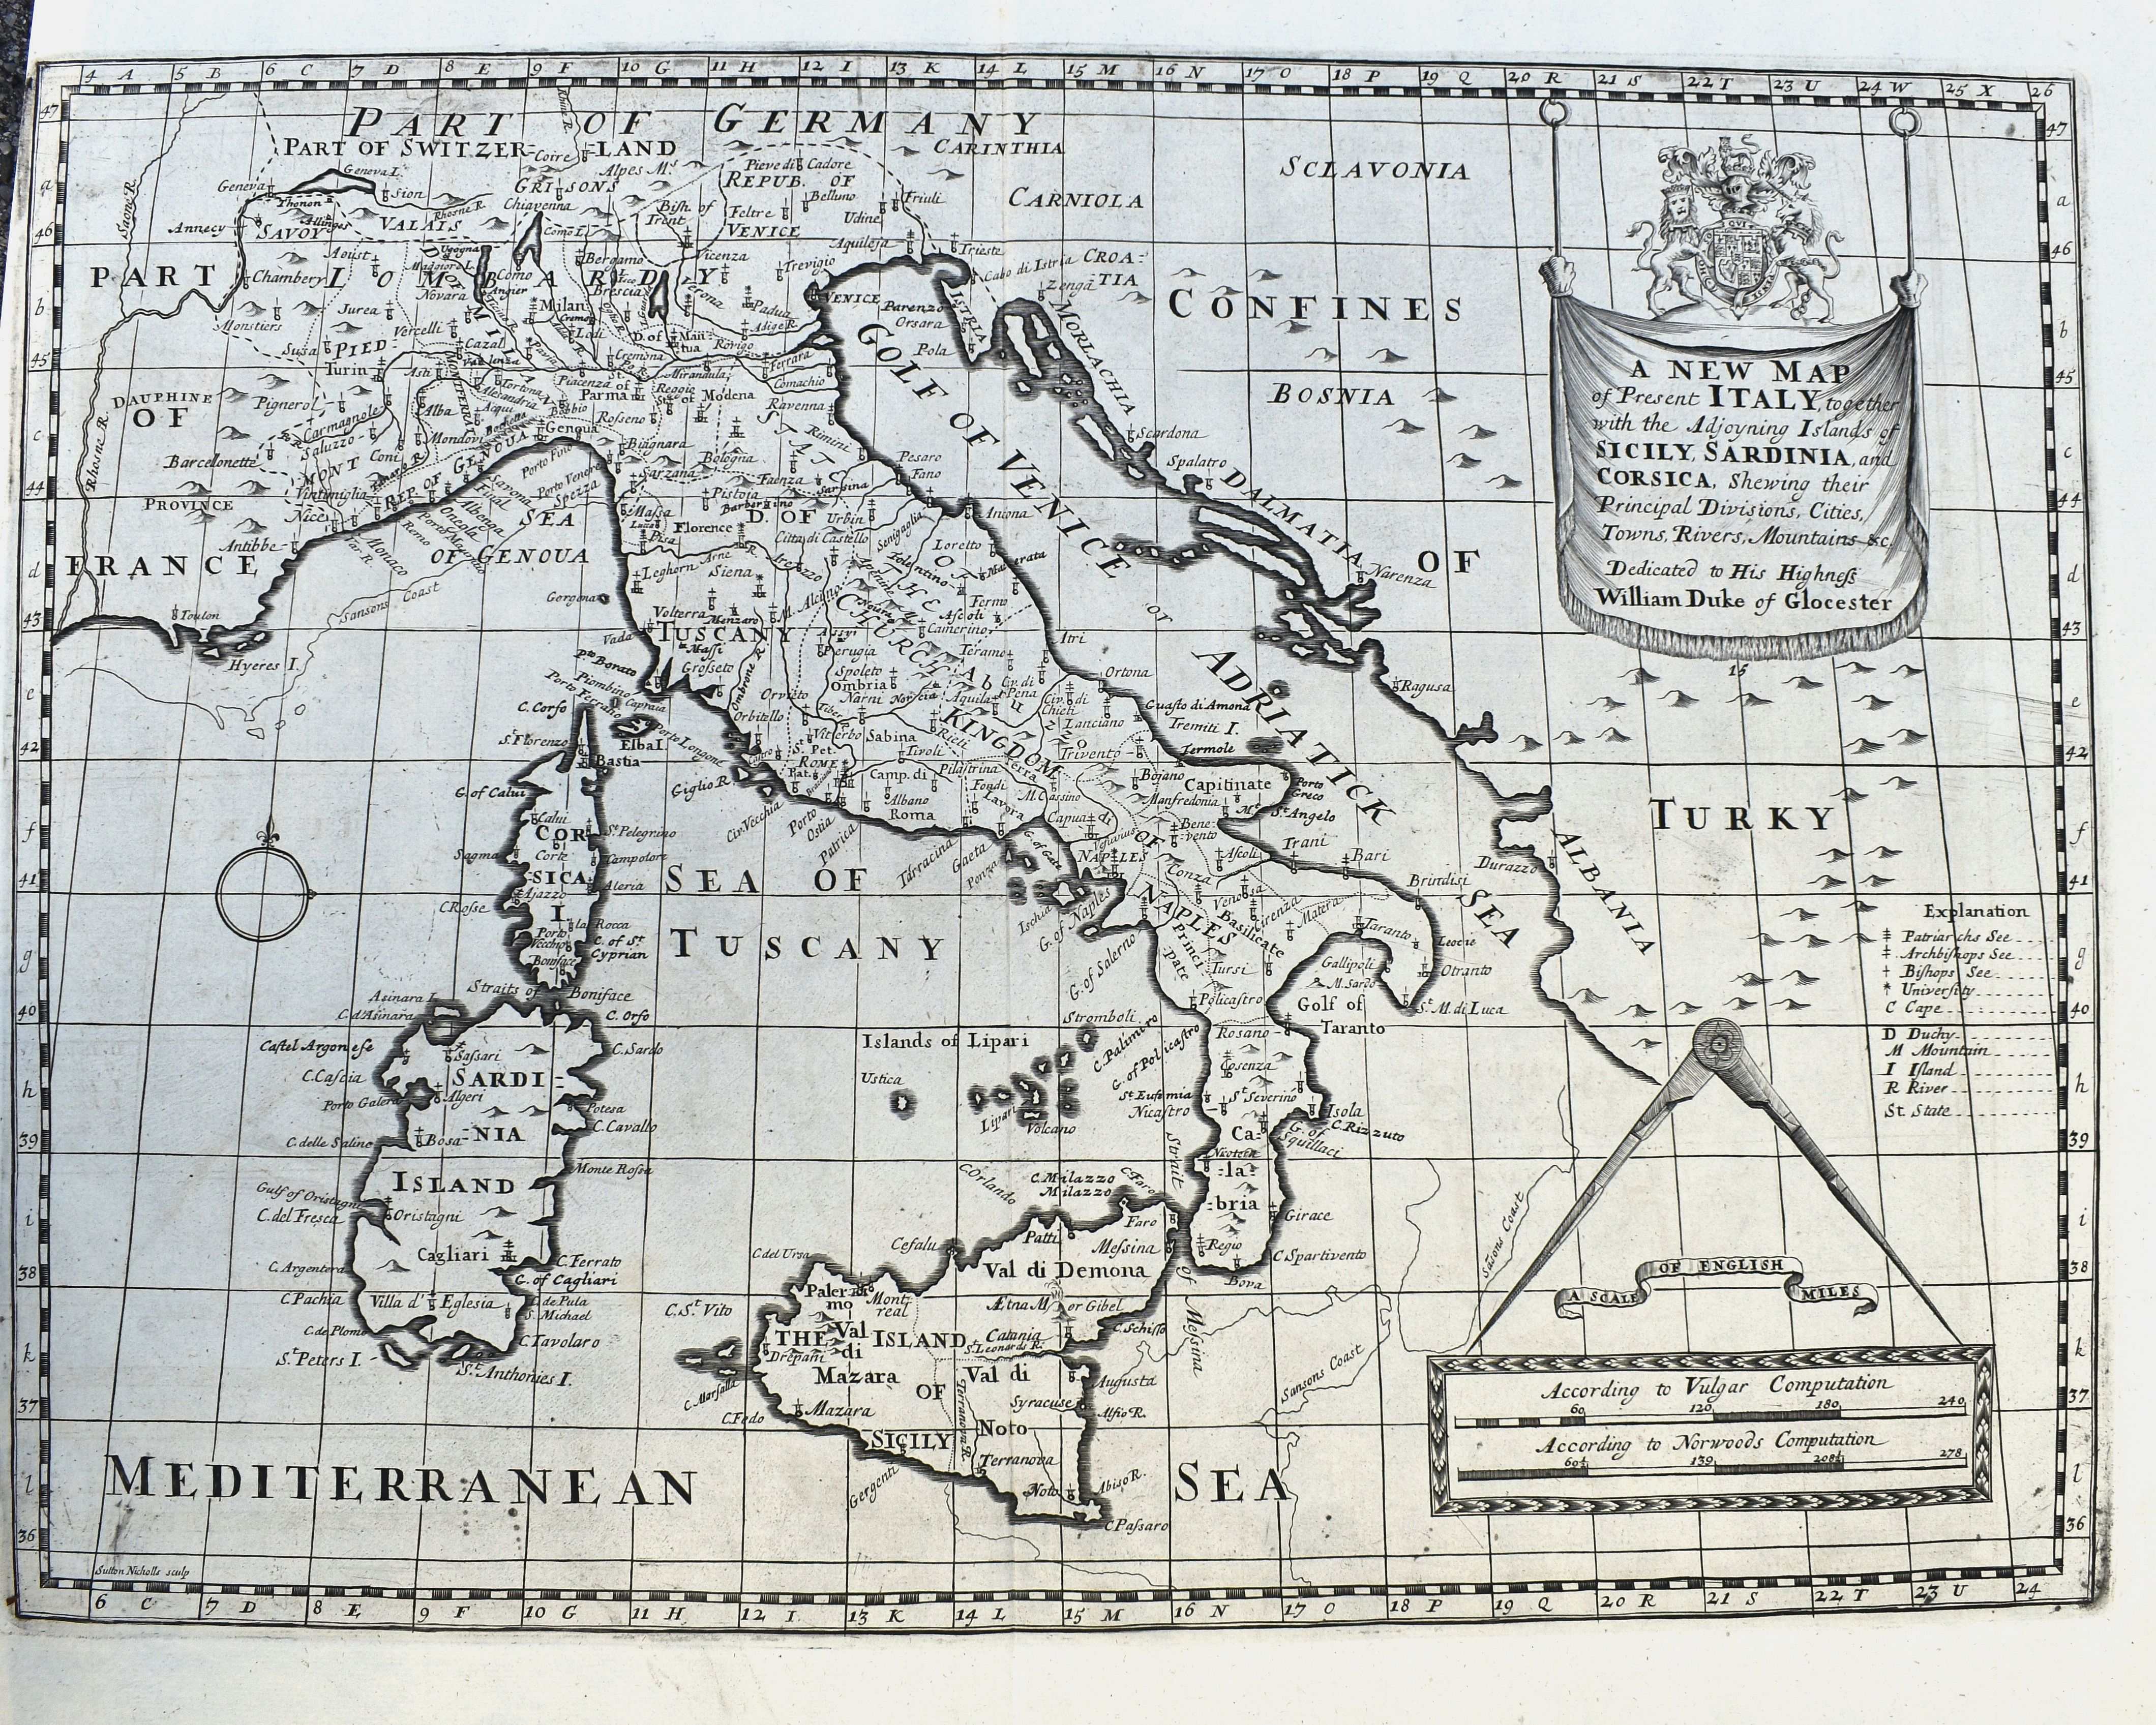 A New Map of Present Italy, together with the Adjoining Islands of Sicily, Sardinia, and Corsica. . .